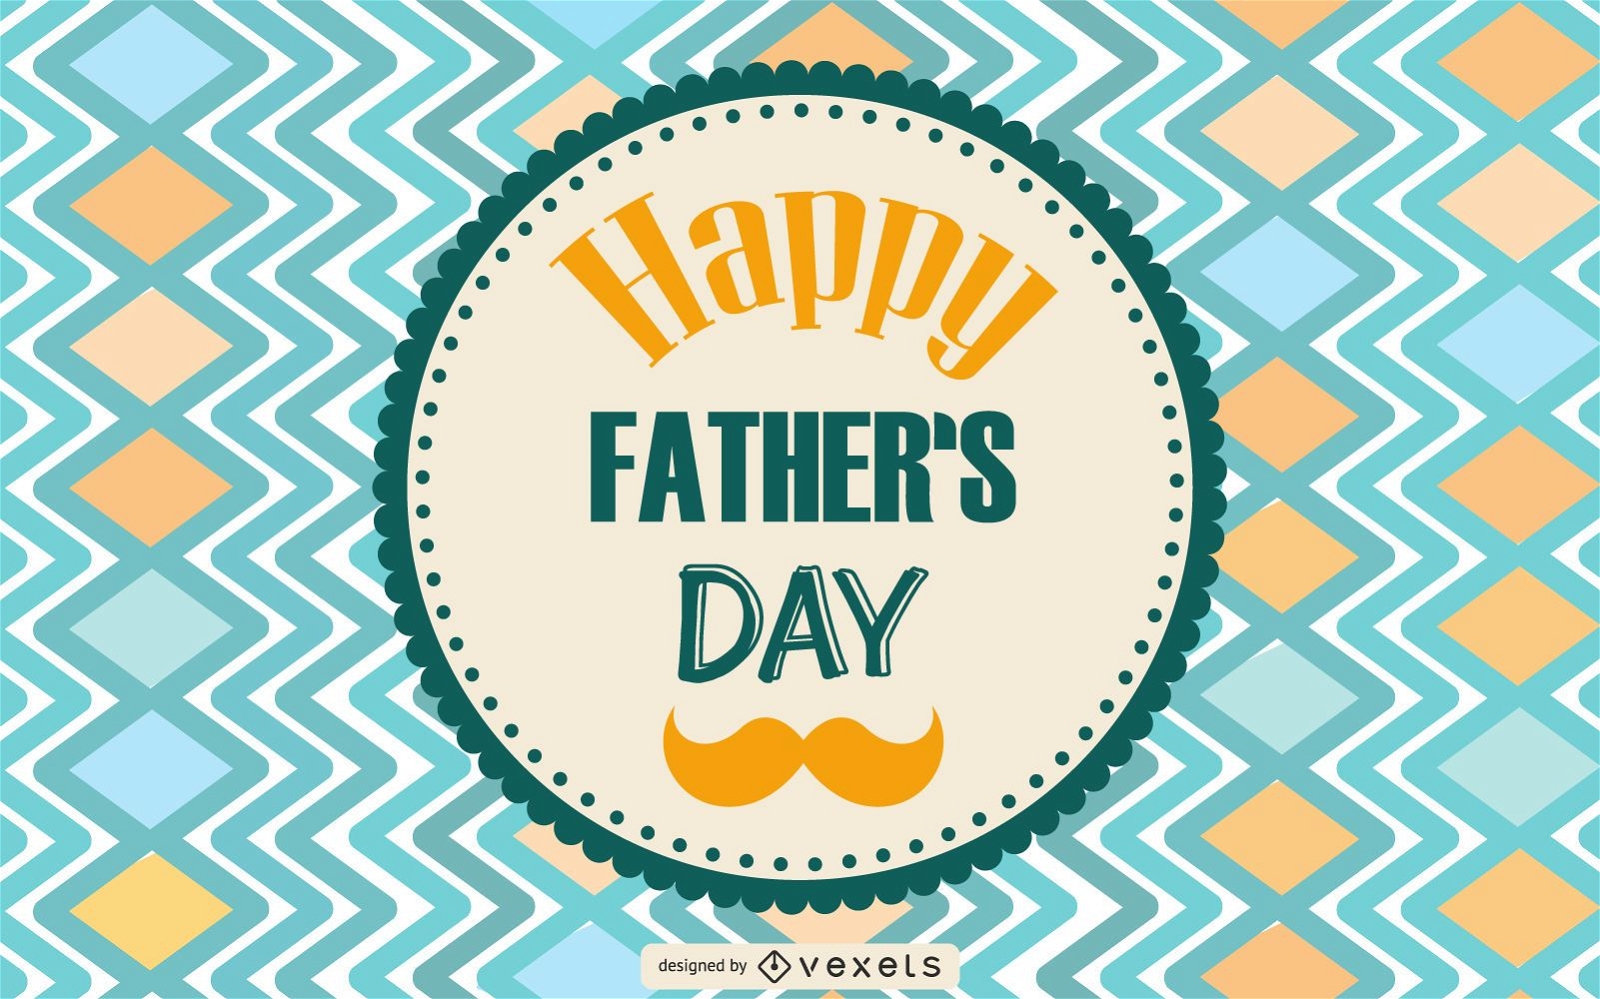 Father's Day Vintage Greeting Card Design 